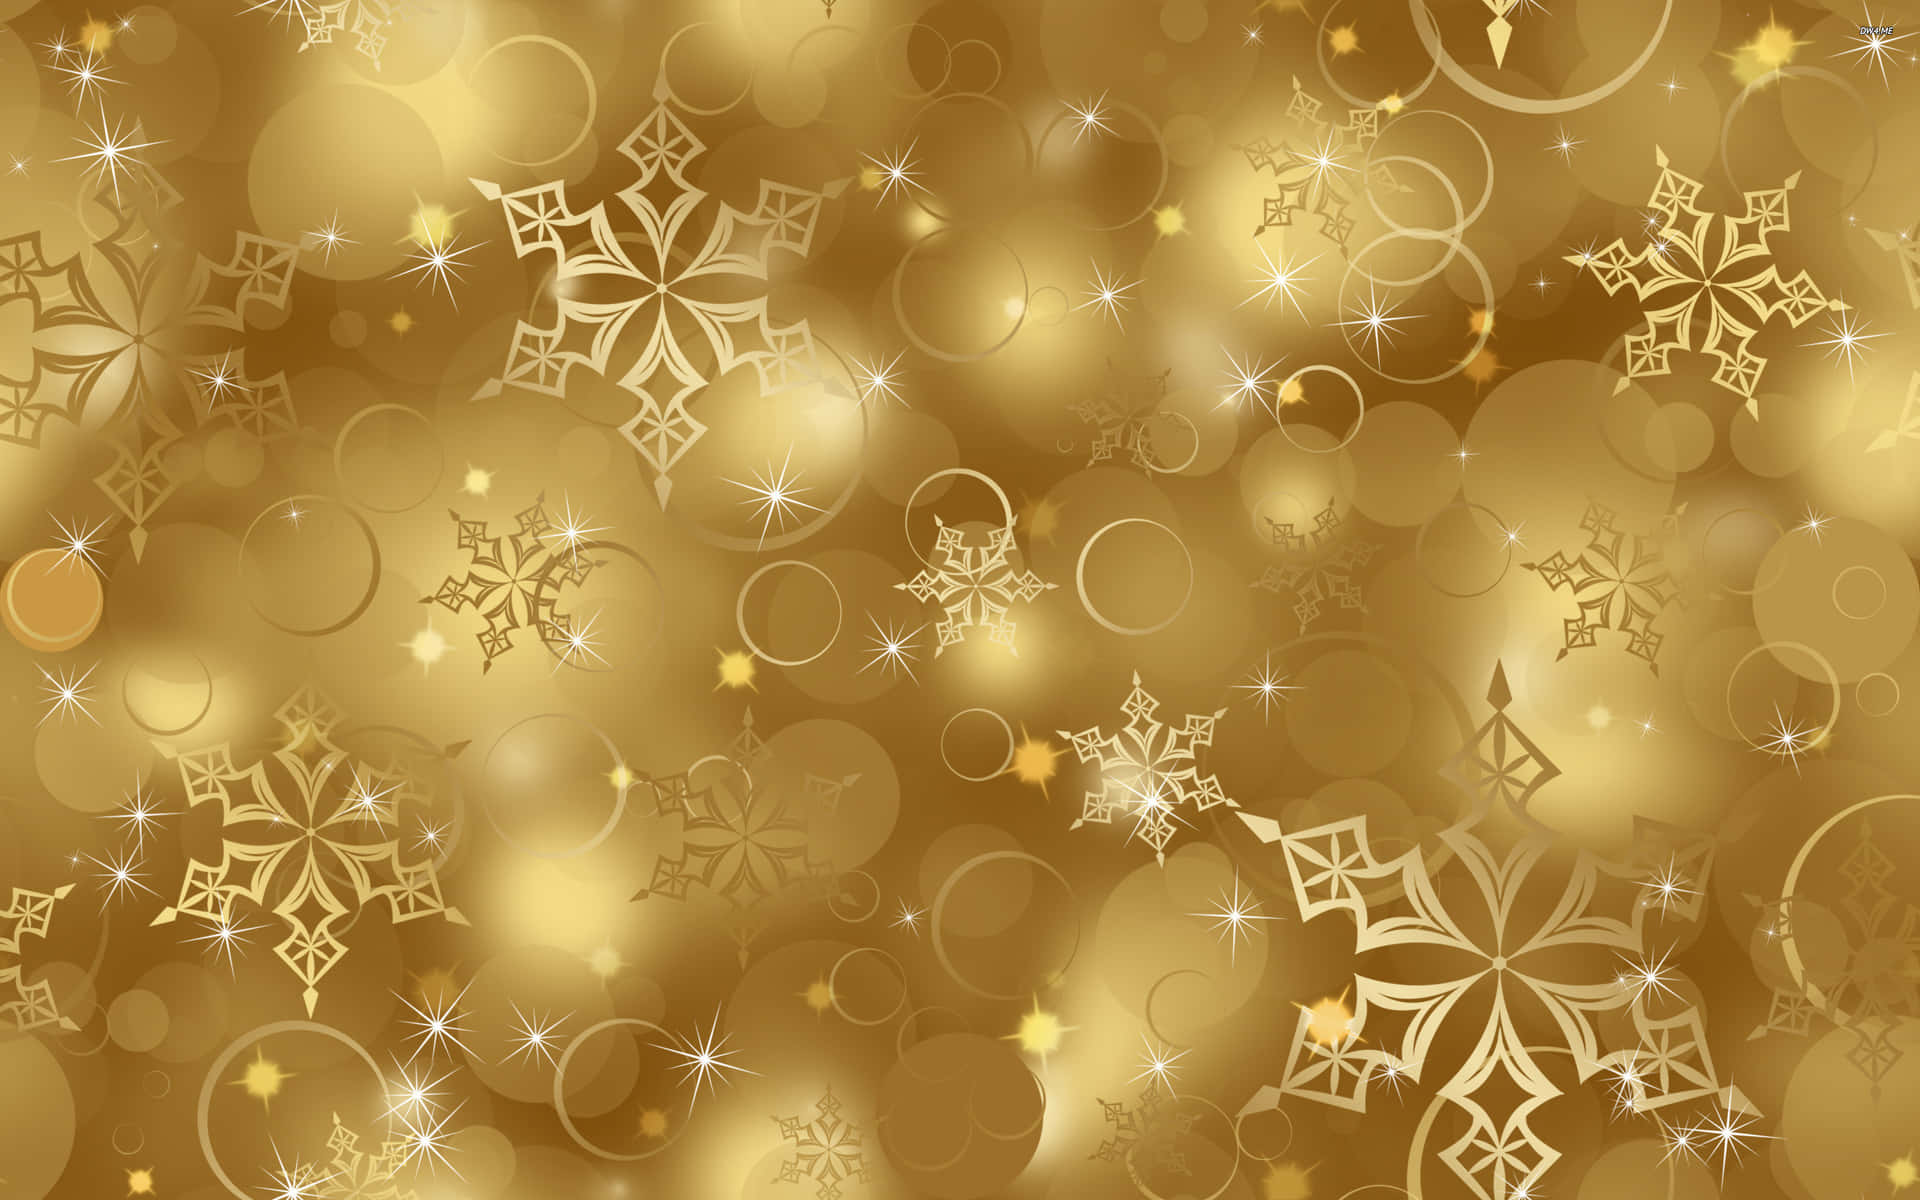 Rich and Luxurious High Resolution Gold Background